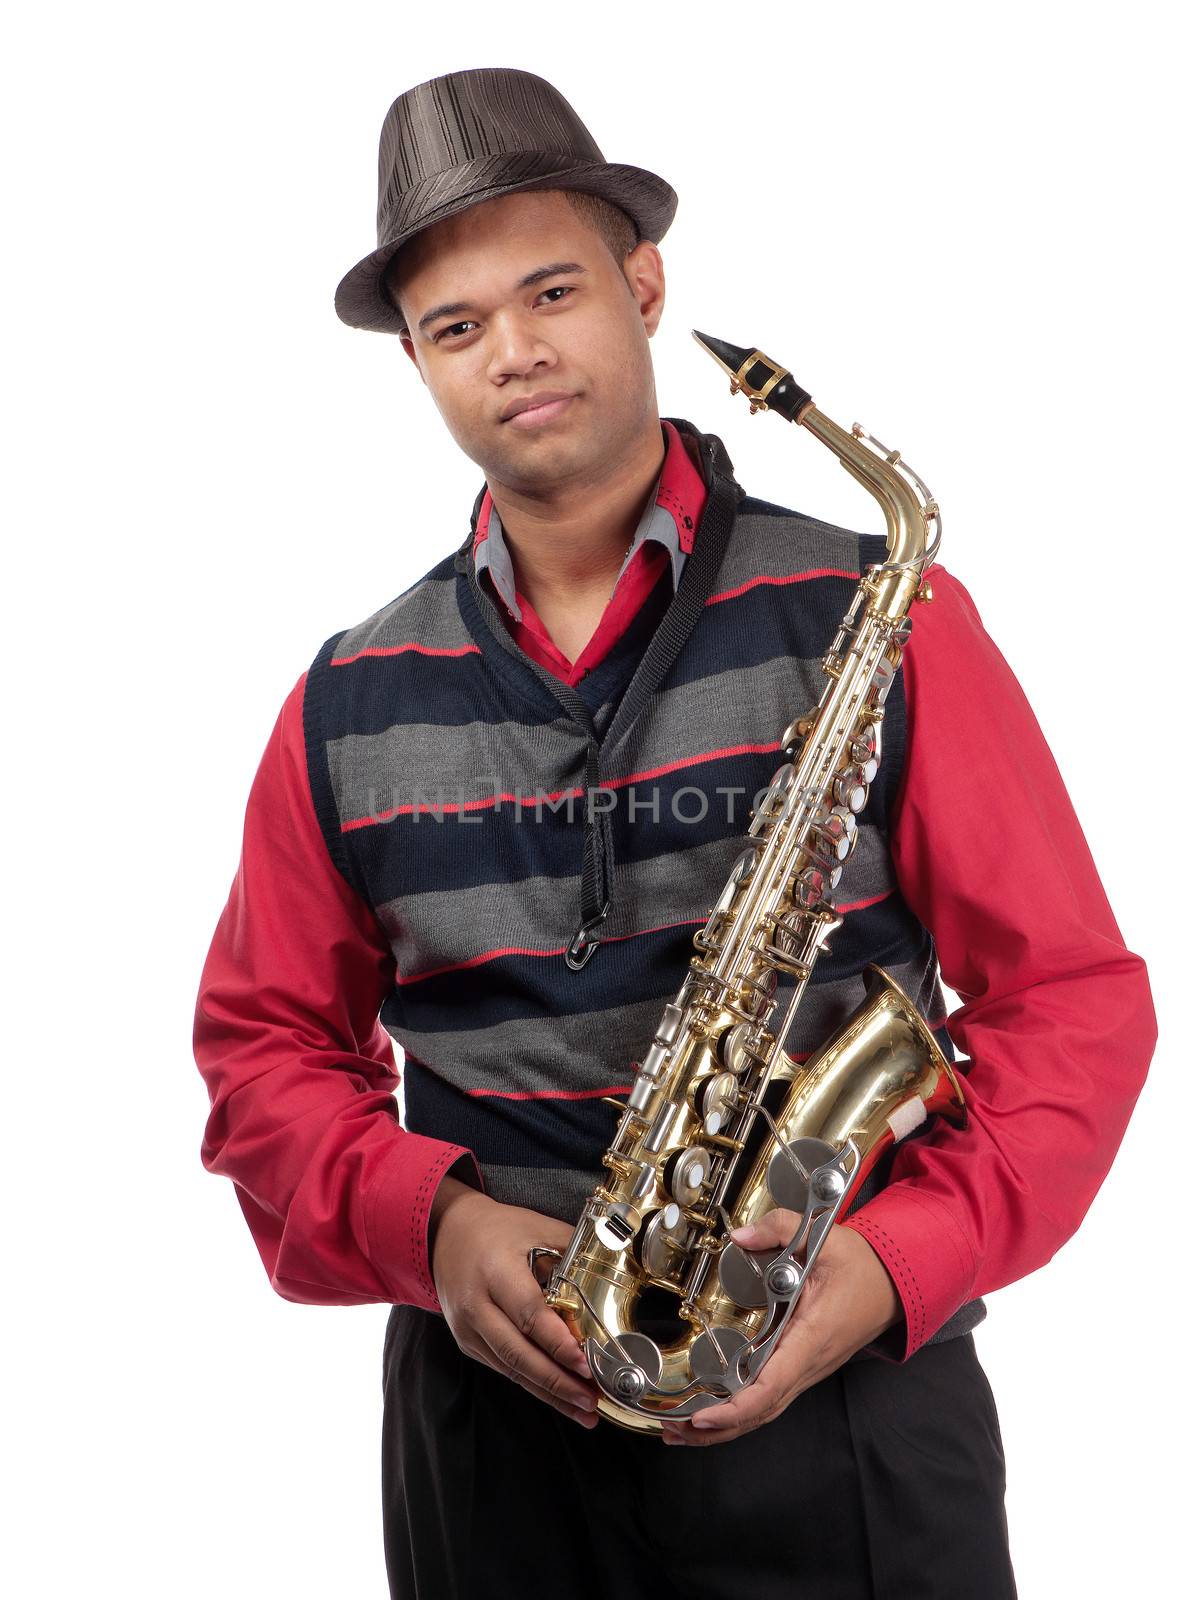 A three quarter view of a young saxophonist is shown.